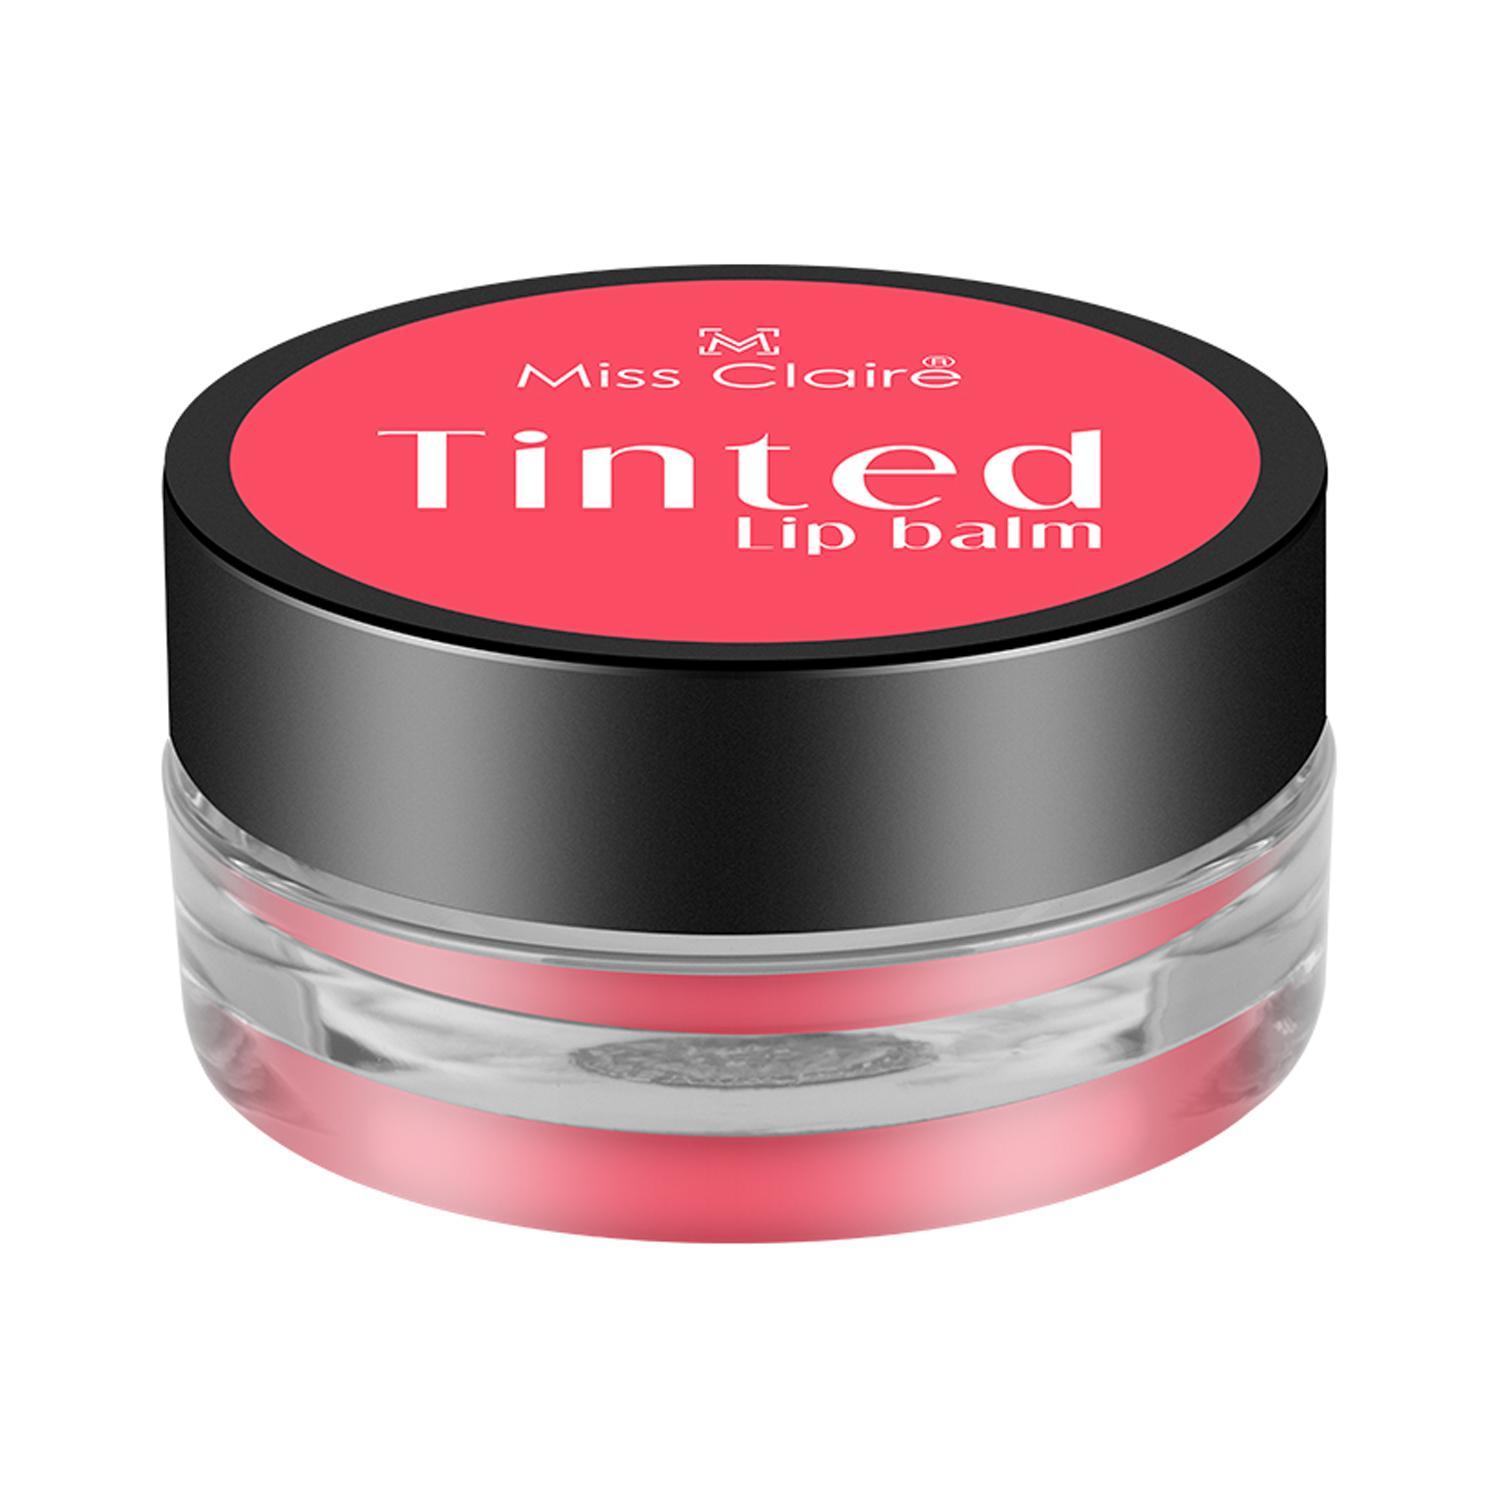 miss-claire-tinted-lip-balm---01-pink-(3g)